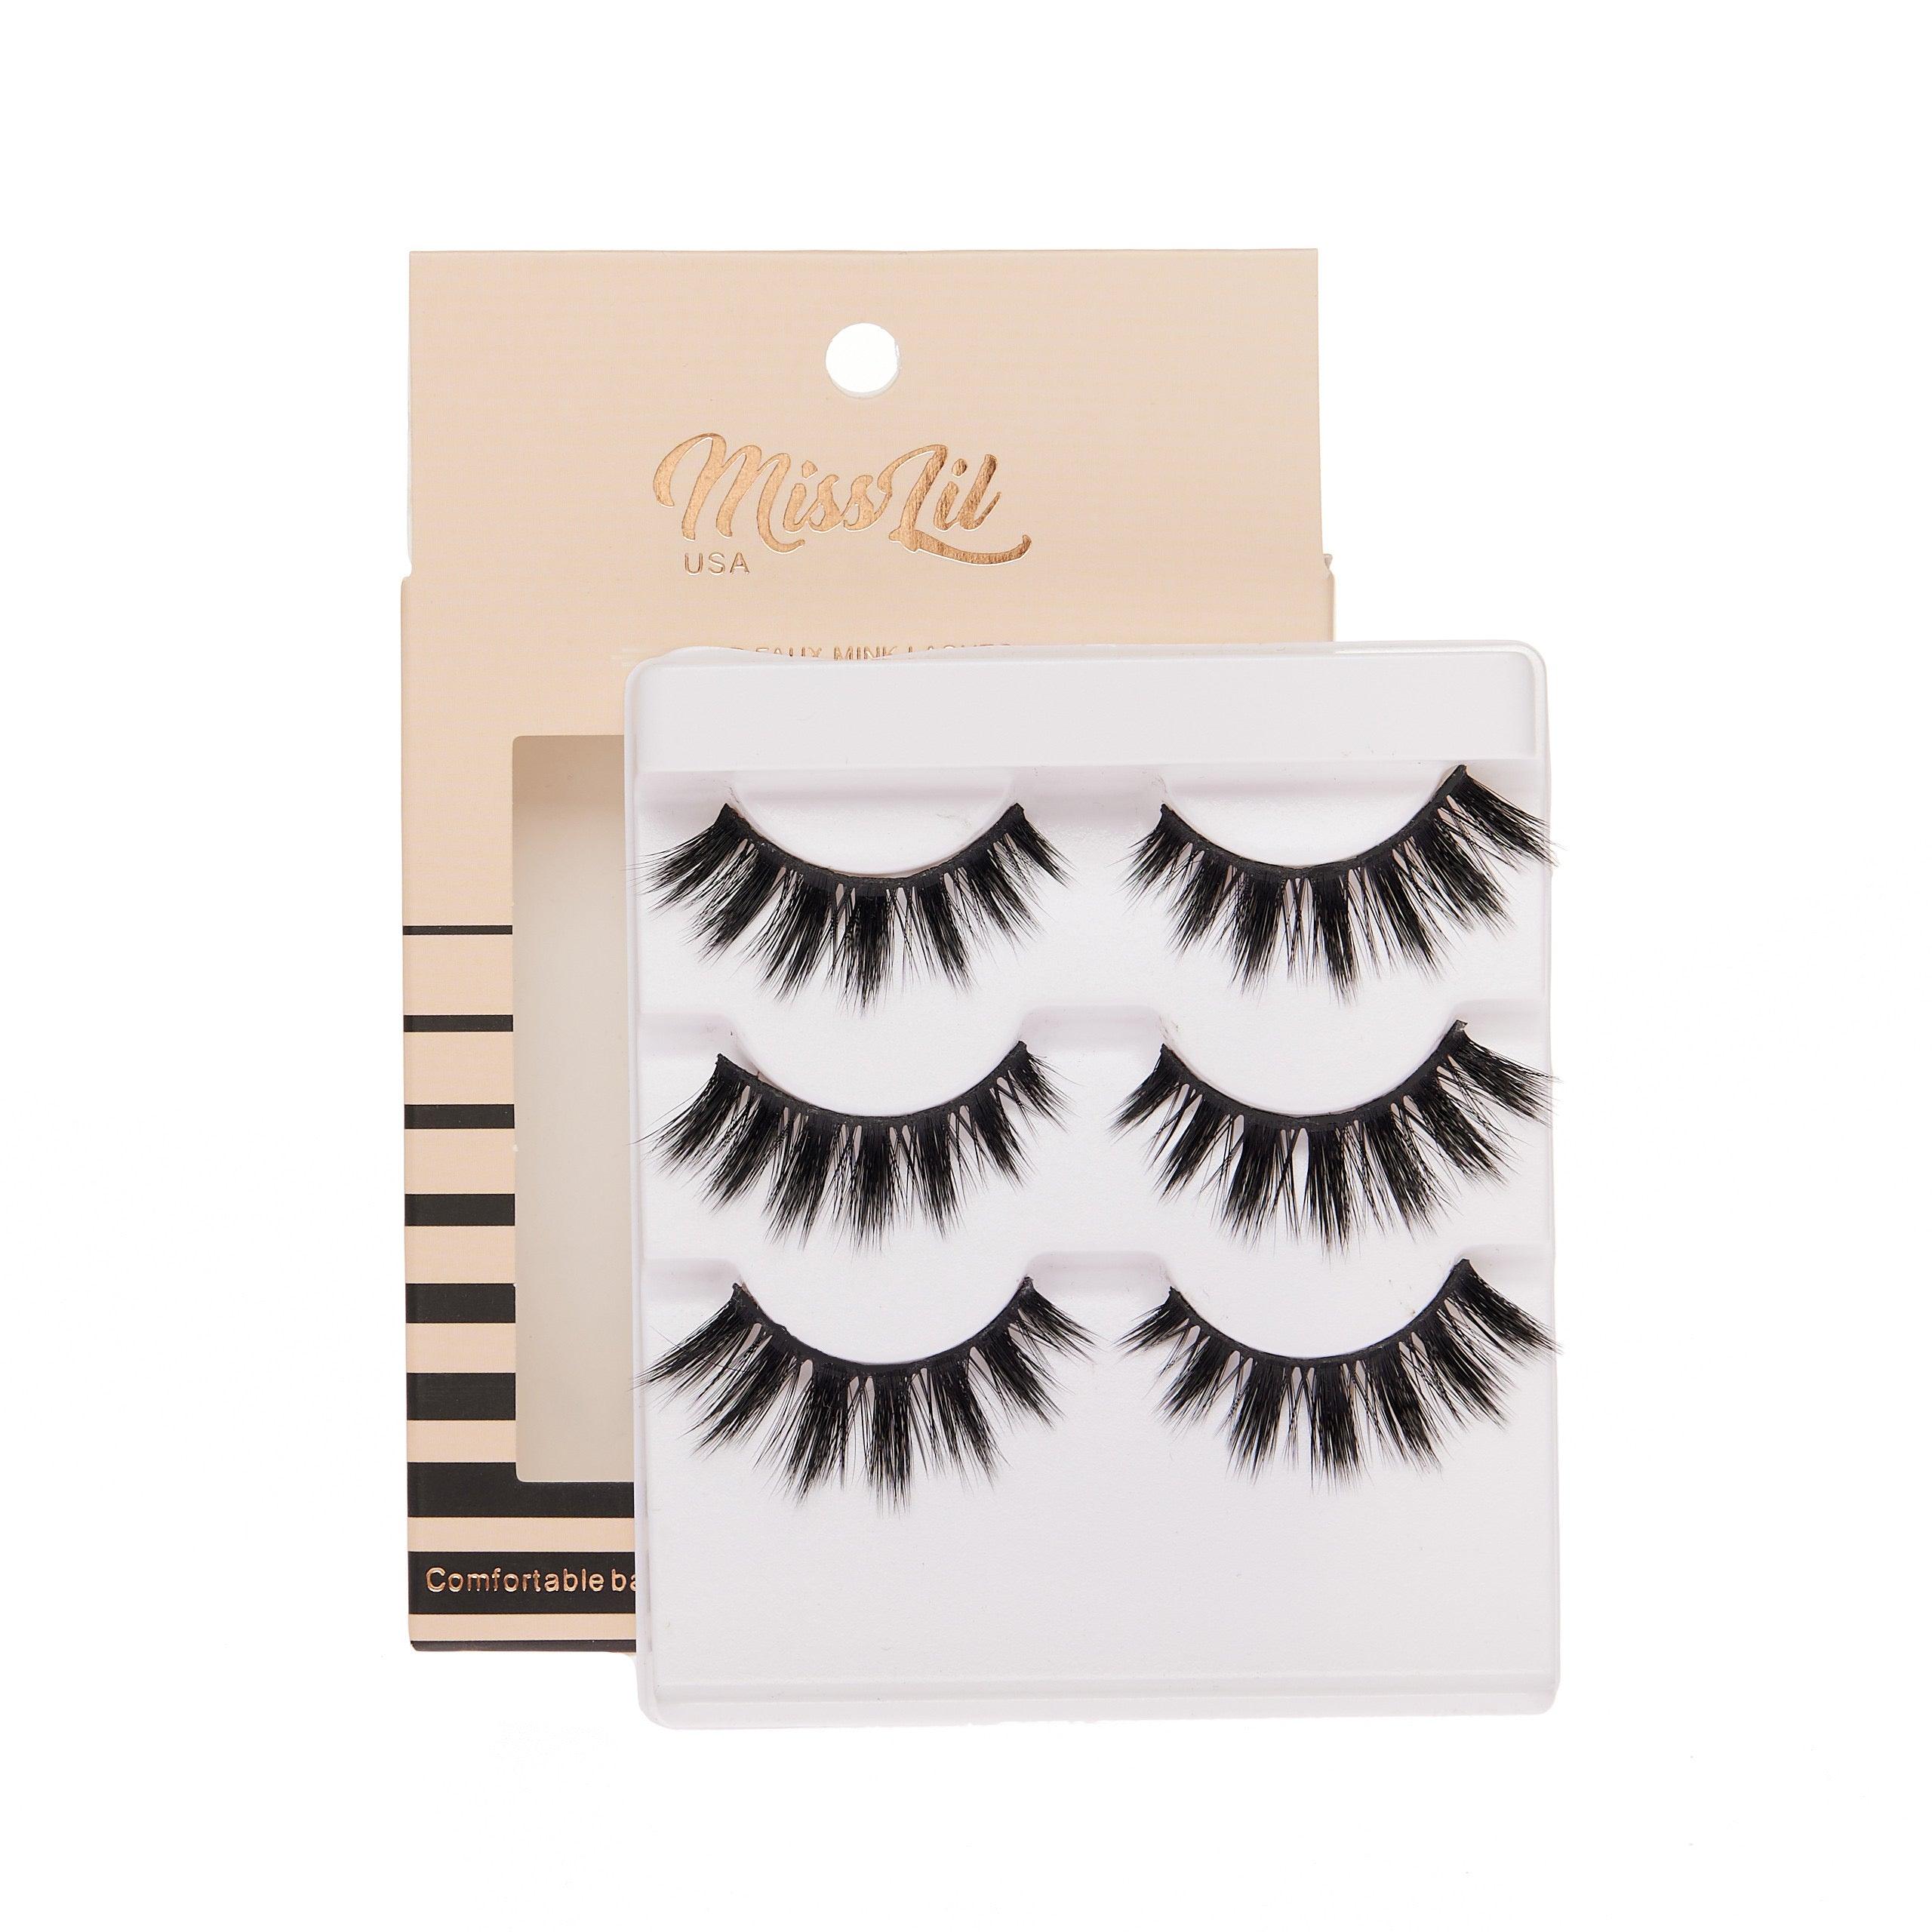 3-Pair Faux 9D Mink Eyelashes - Luxury Collection #12 - Pack of 3 - Miss Lil USA